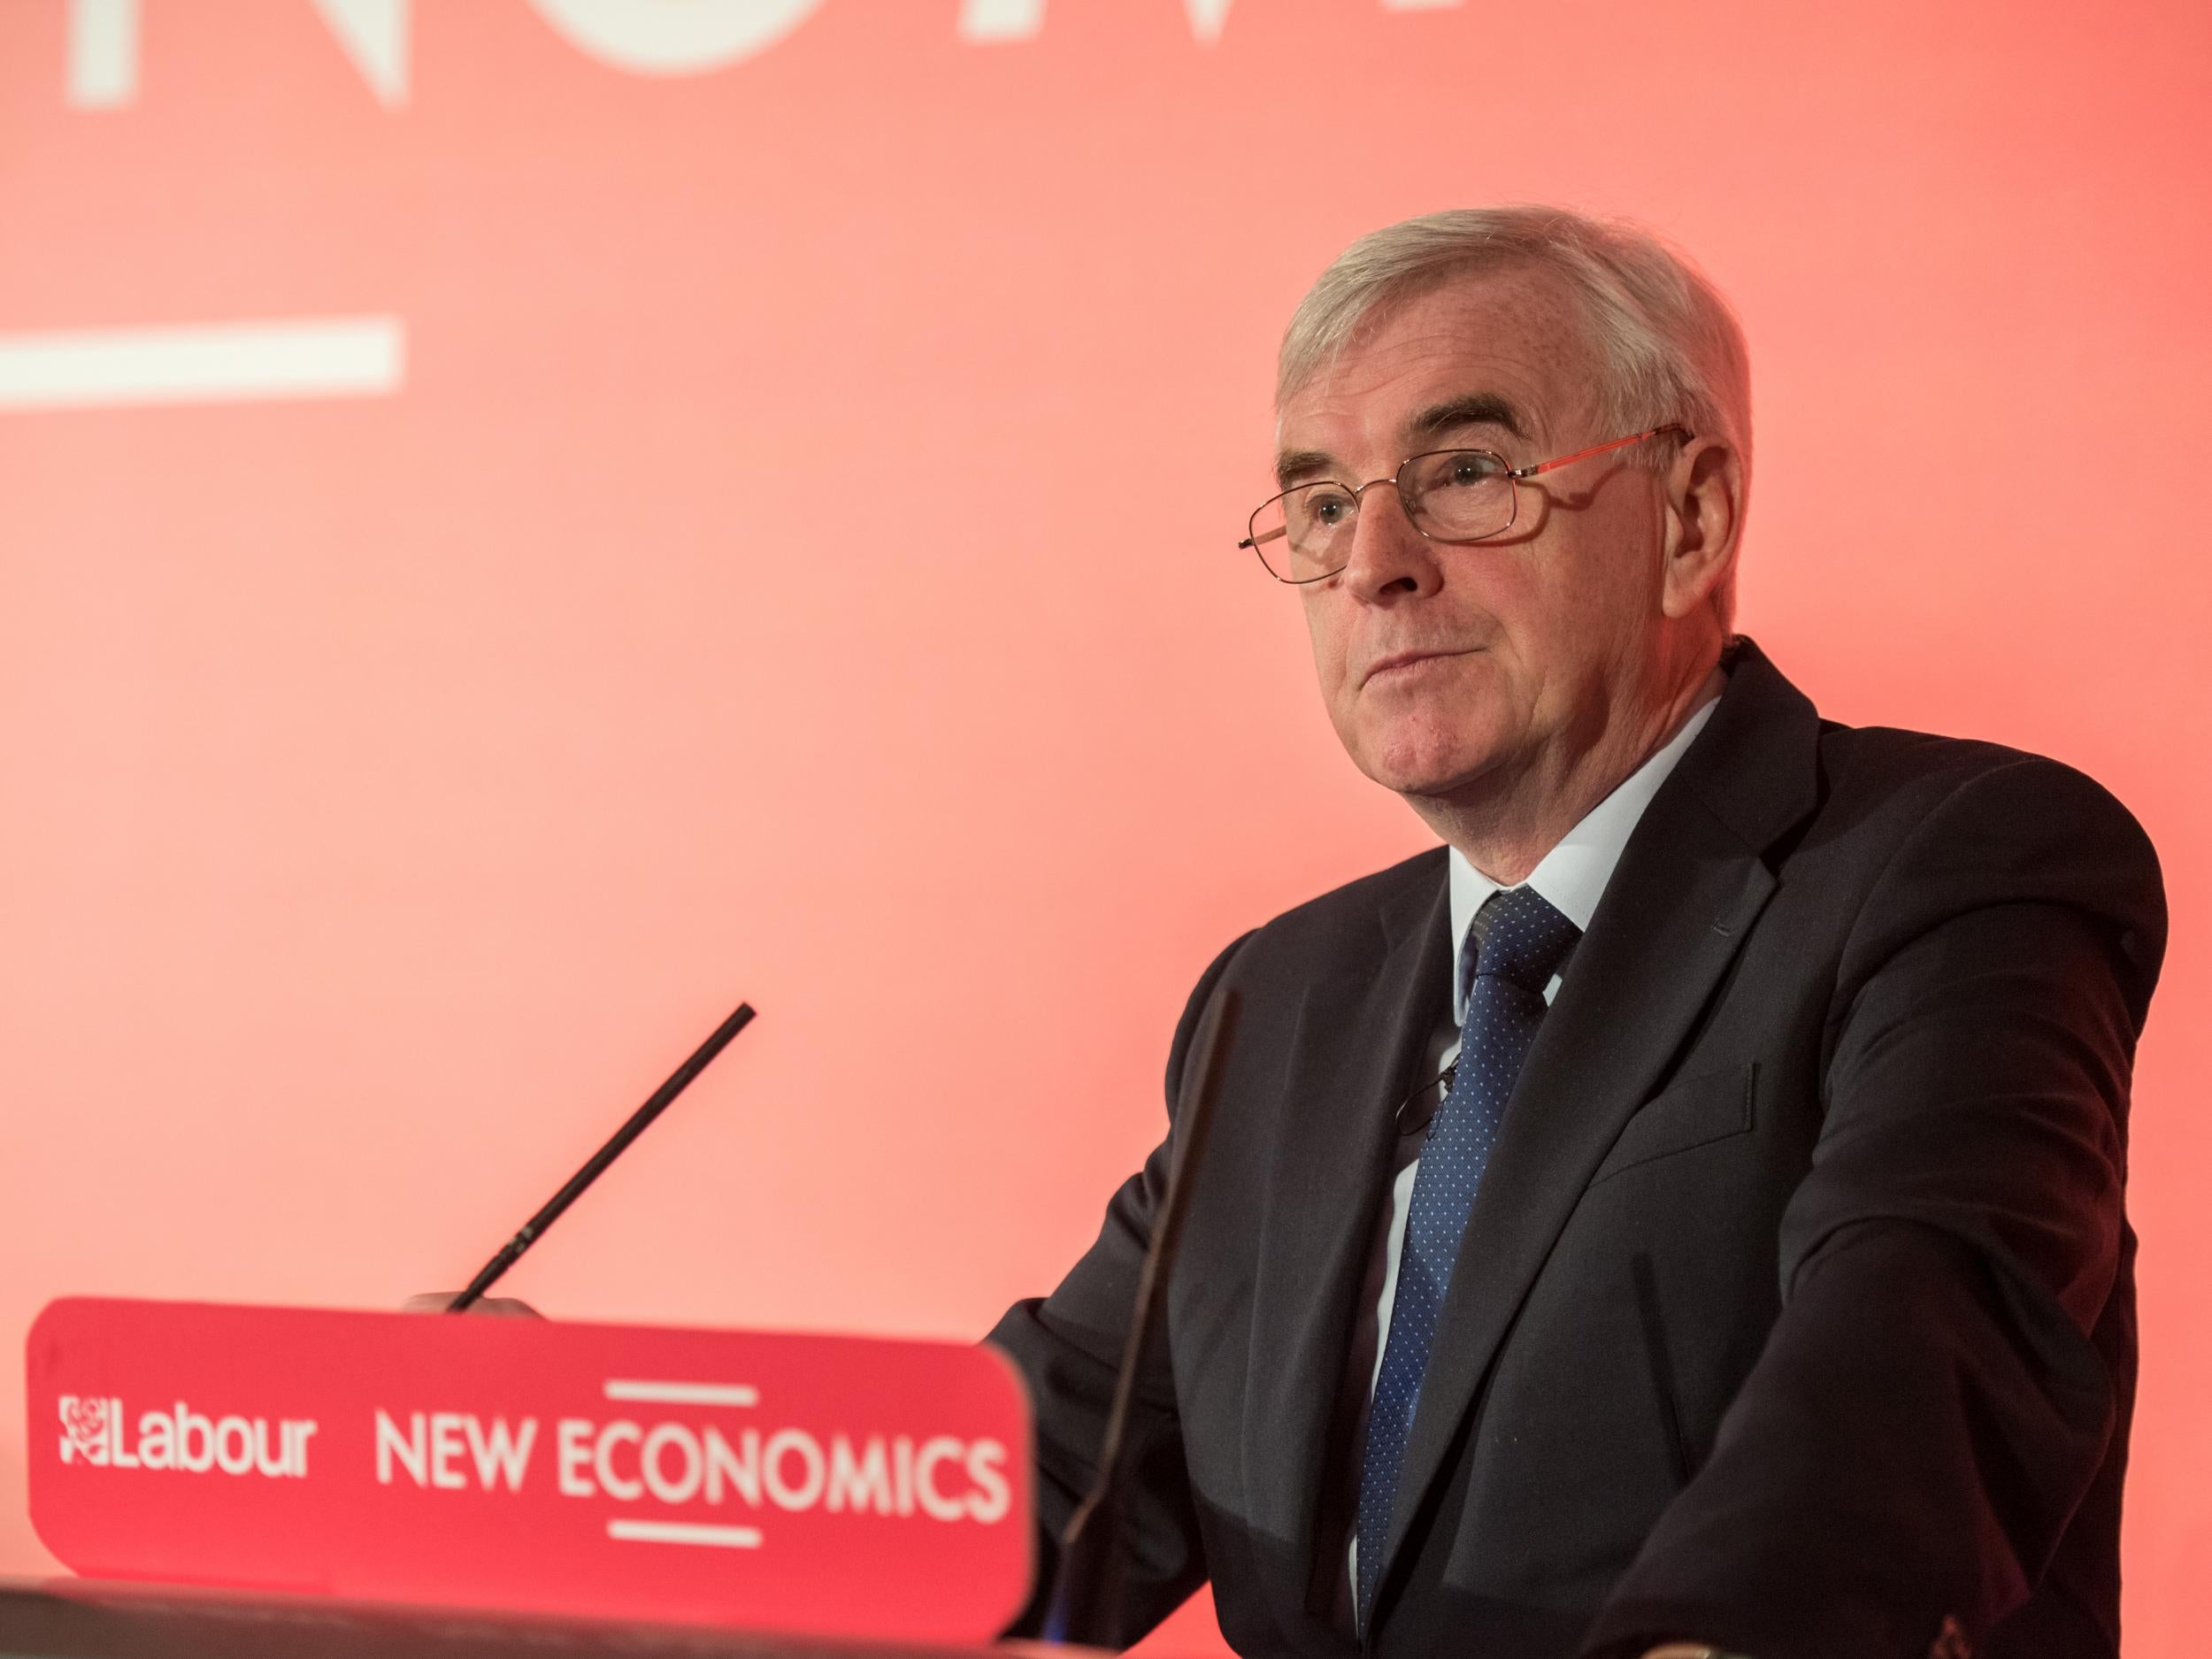 Unlike Tony Blair, John McDonnell is prepared to get into some policy specifics about giving employees a financial stake in their workplaces